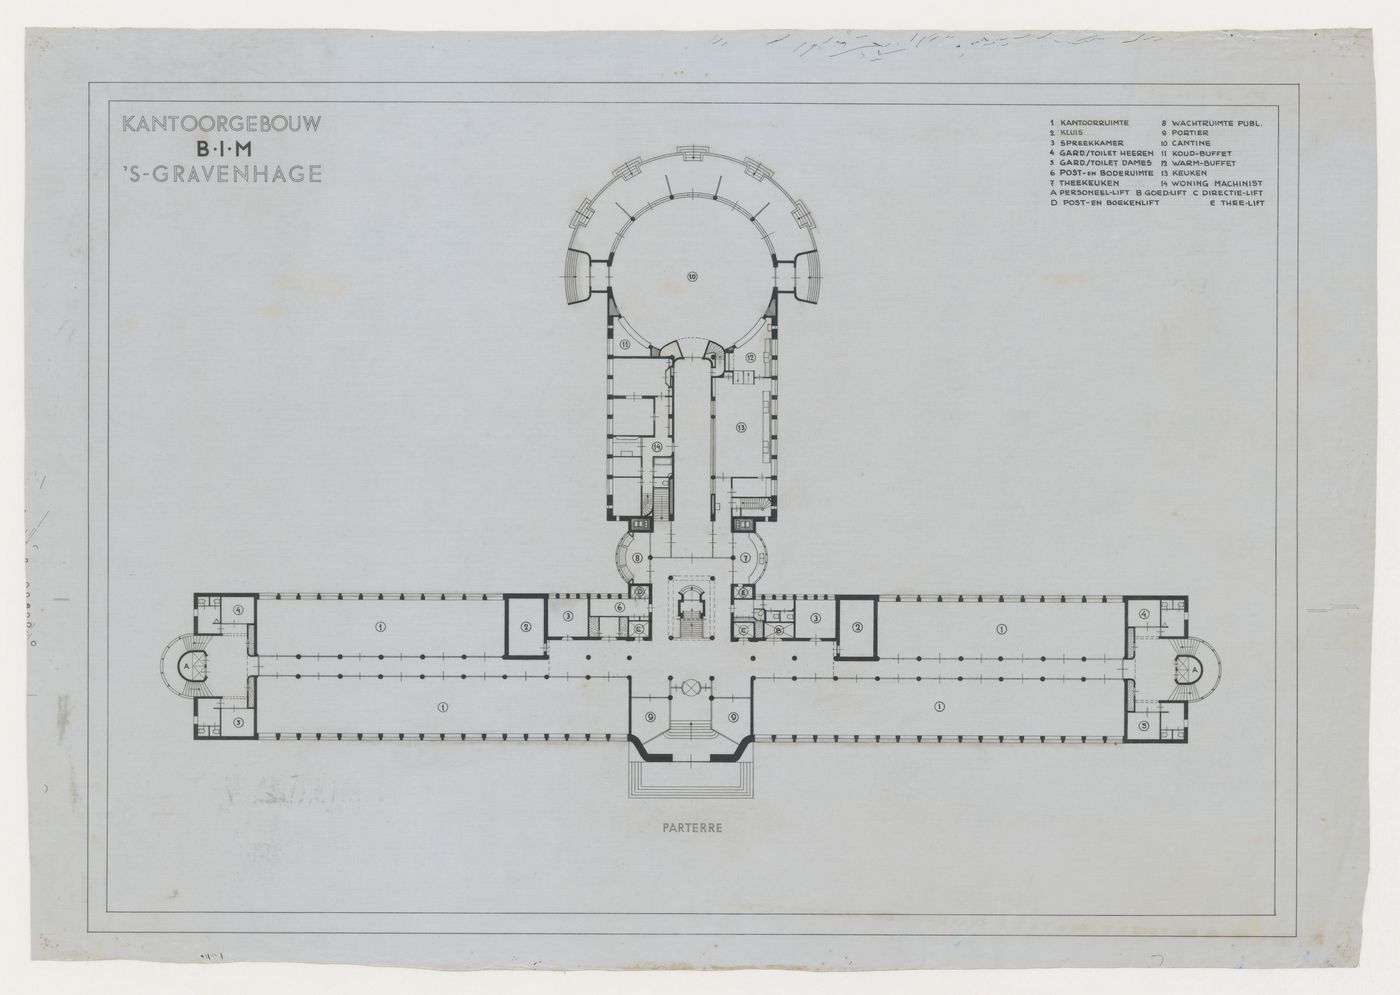 Ground floor plan for the Shell Building, The Hague, Netherlands